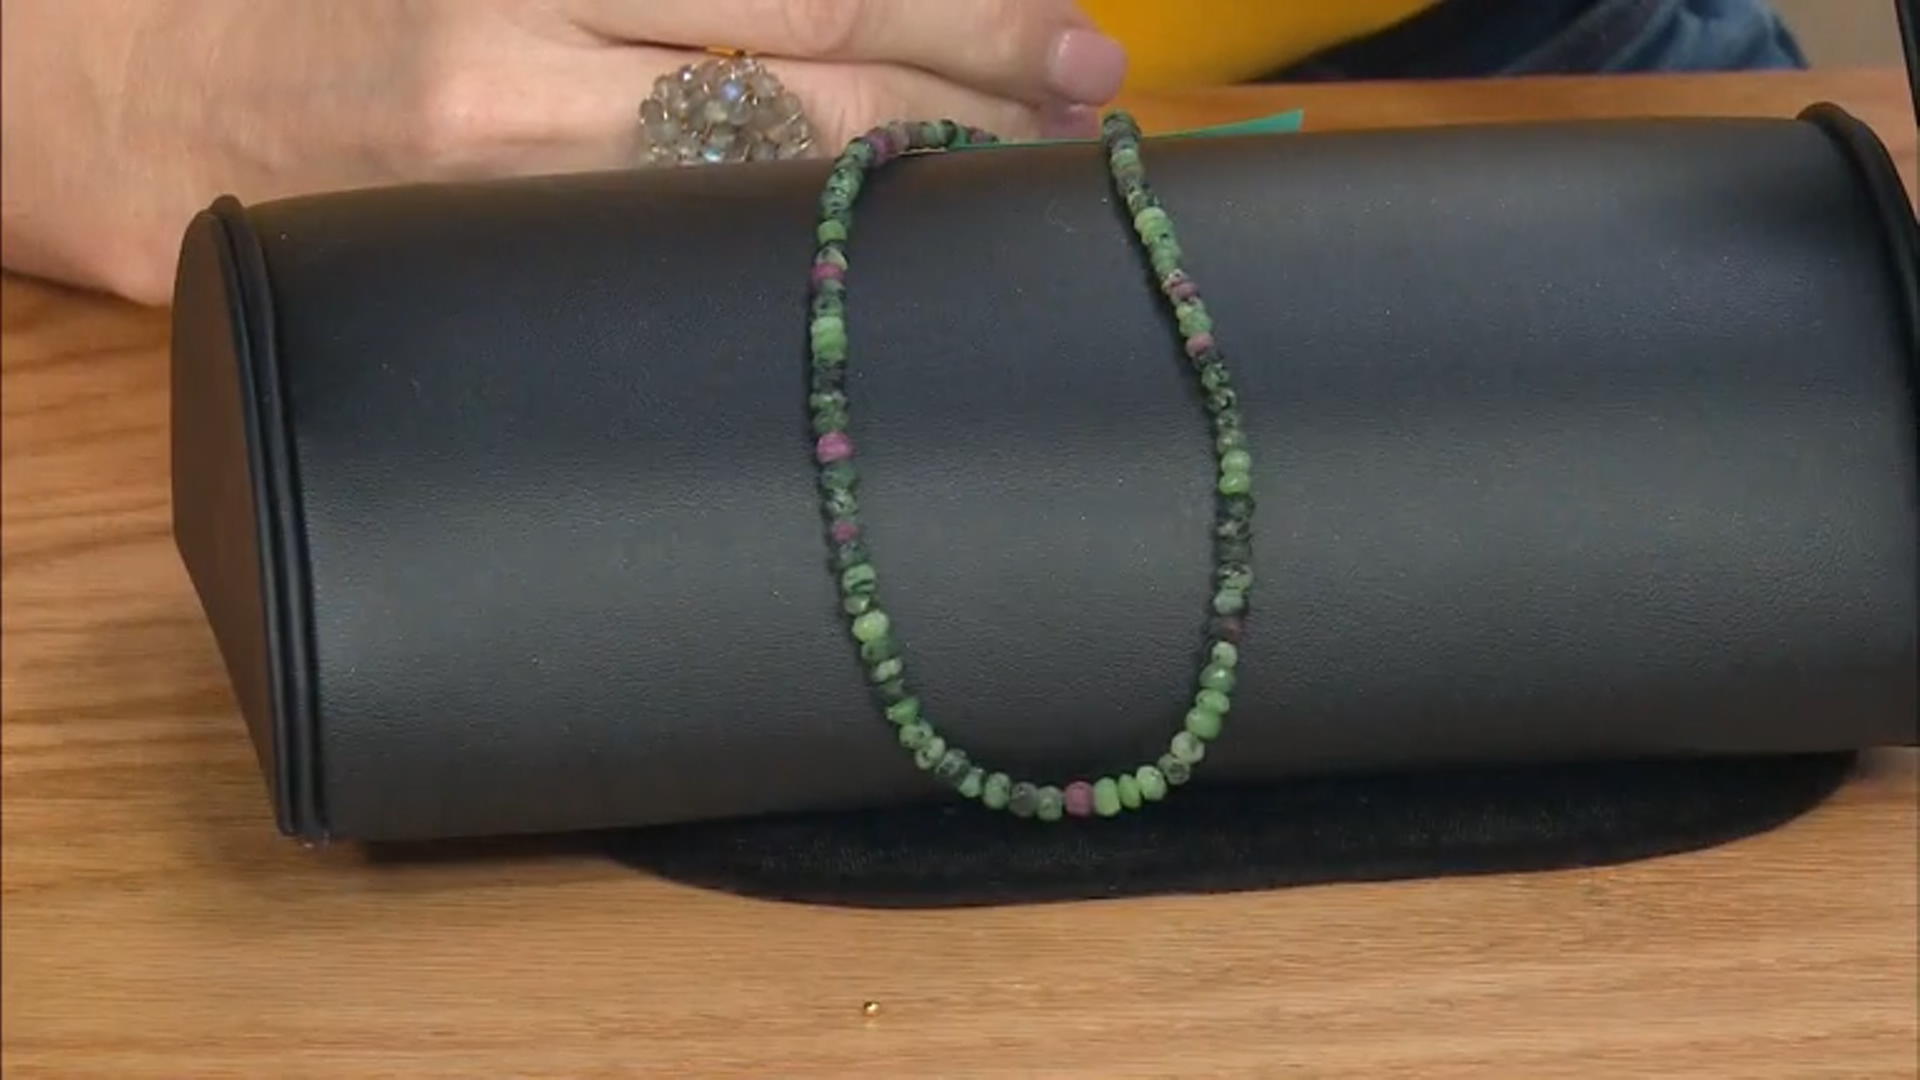 Ruby in Zoisite Faceted 3-5mm Rondelle Bead Strand Approximately 16" in Length Video Thumbnail